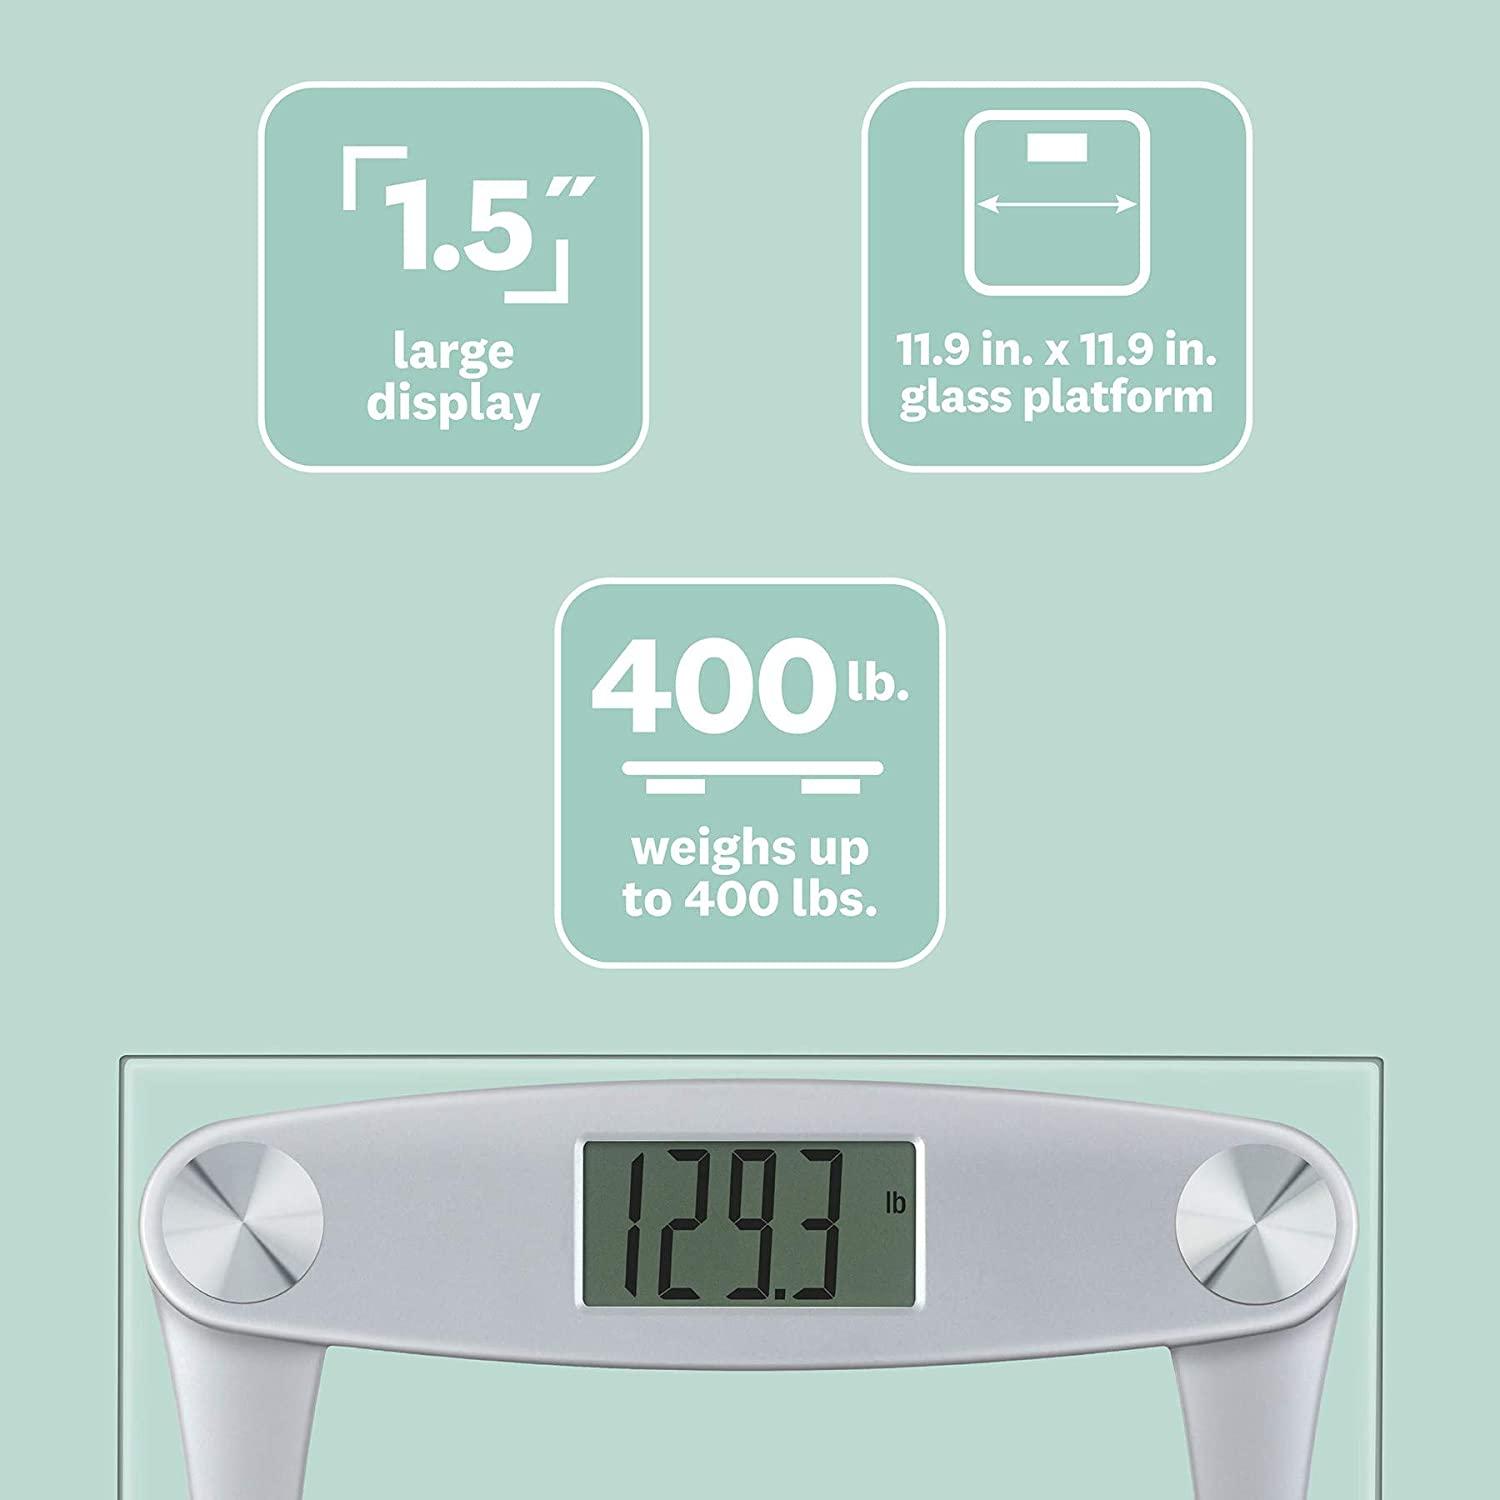 Weight Watchers by Conair Scales by Conair Digital Glass Bathroom Scale 400  Lbs. Capacity